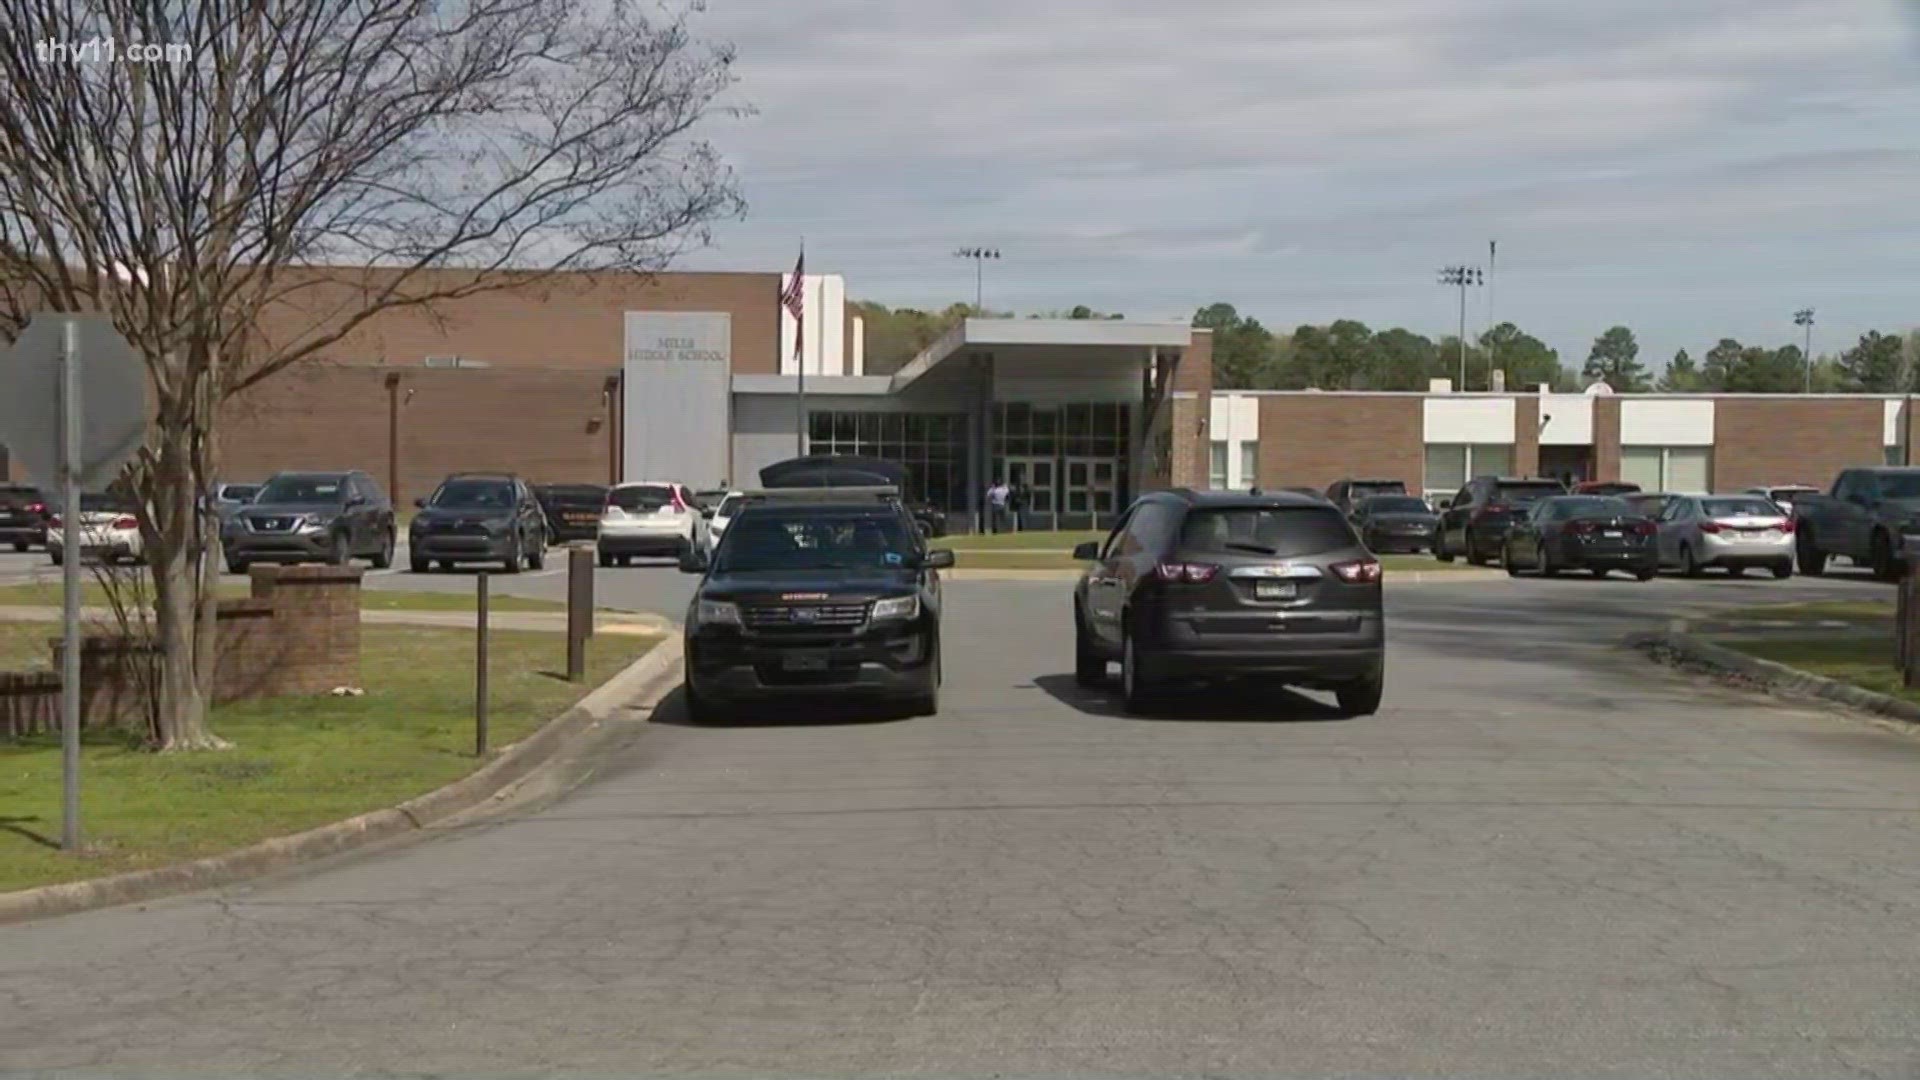 Mills Middle School and Mills High School were both placed on lockdown due to a "threat" that the front office received through the phone.